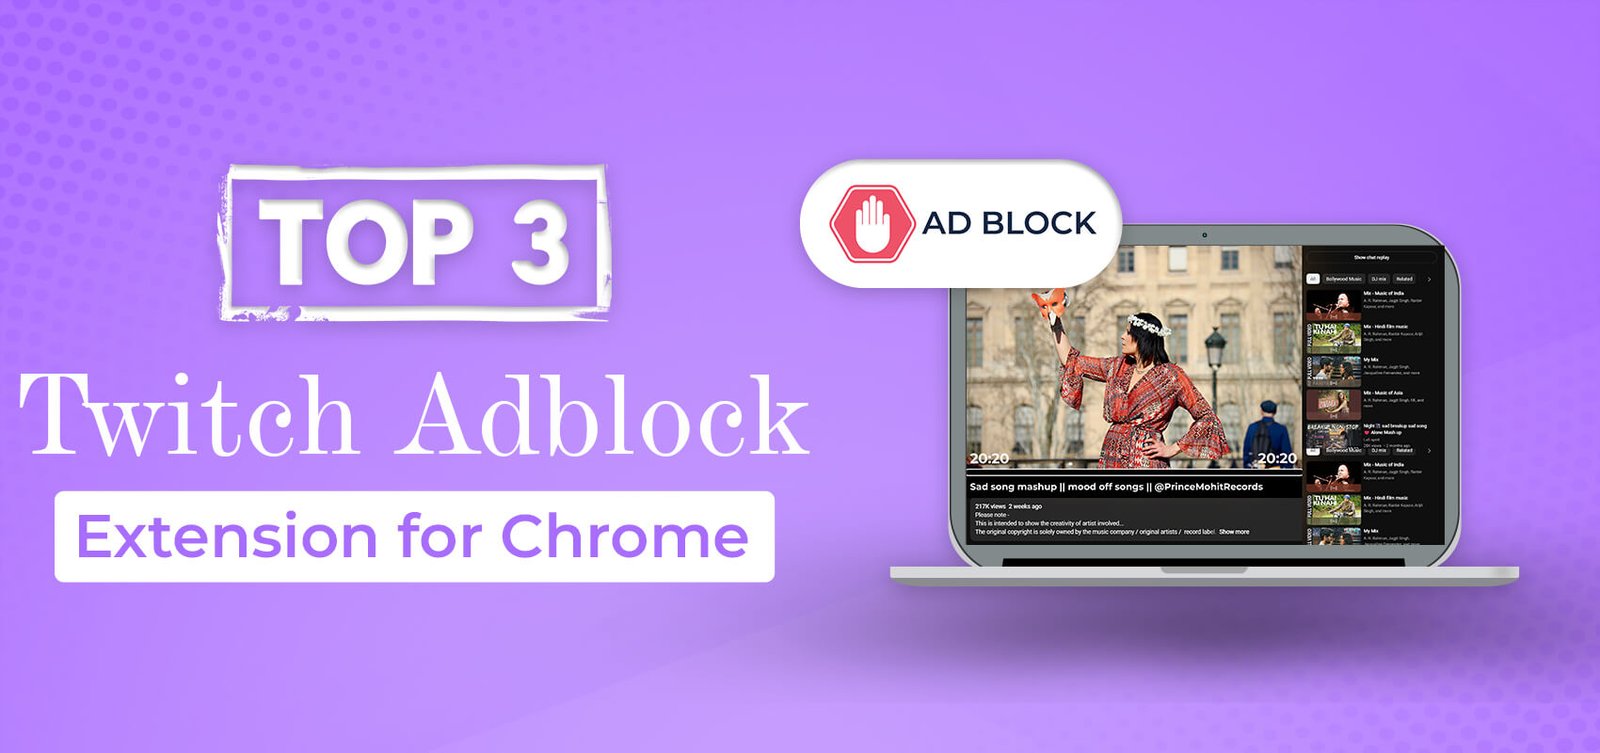 Top 3 Twitch Adblock Extension for Chrome